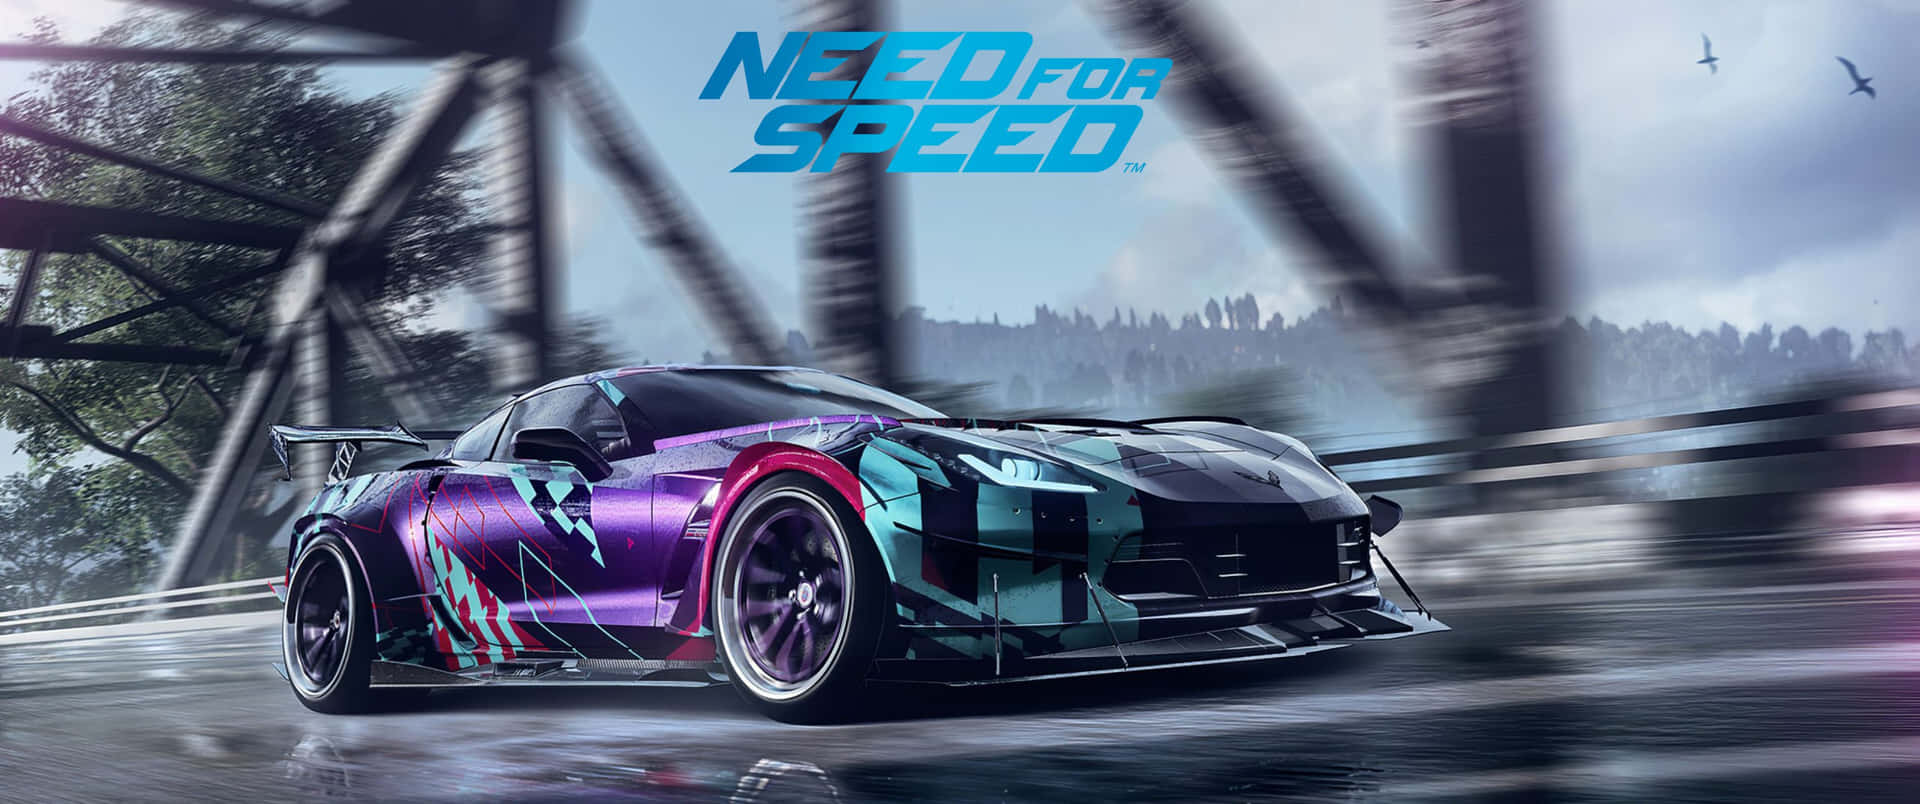 L'adrenalinadi Need For Speed In Un Display 3440x1440p Completo!